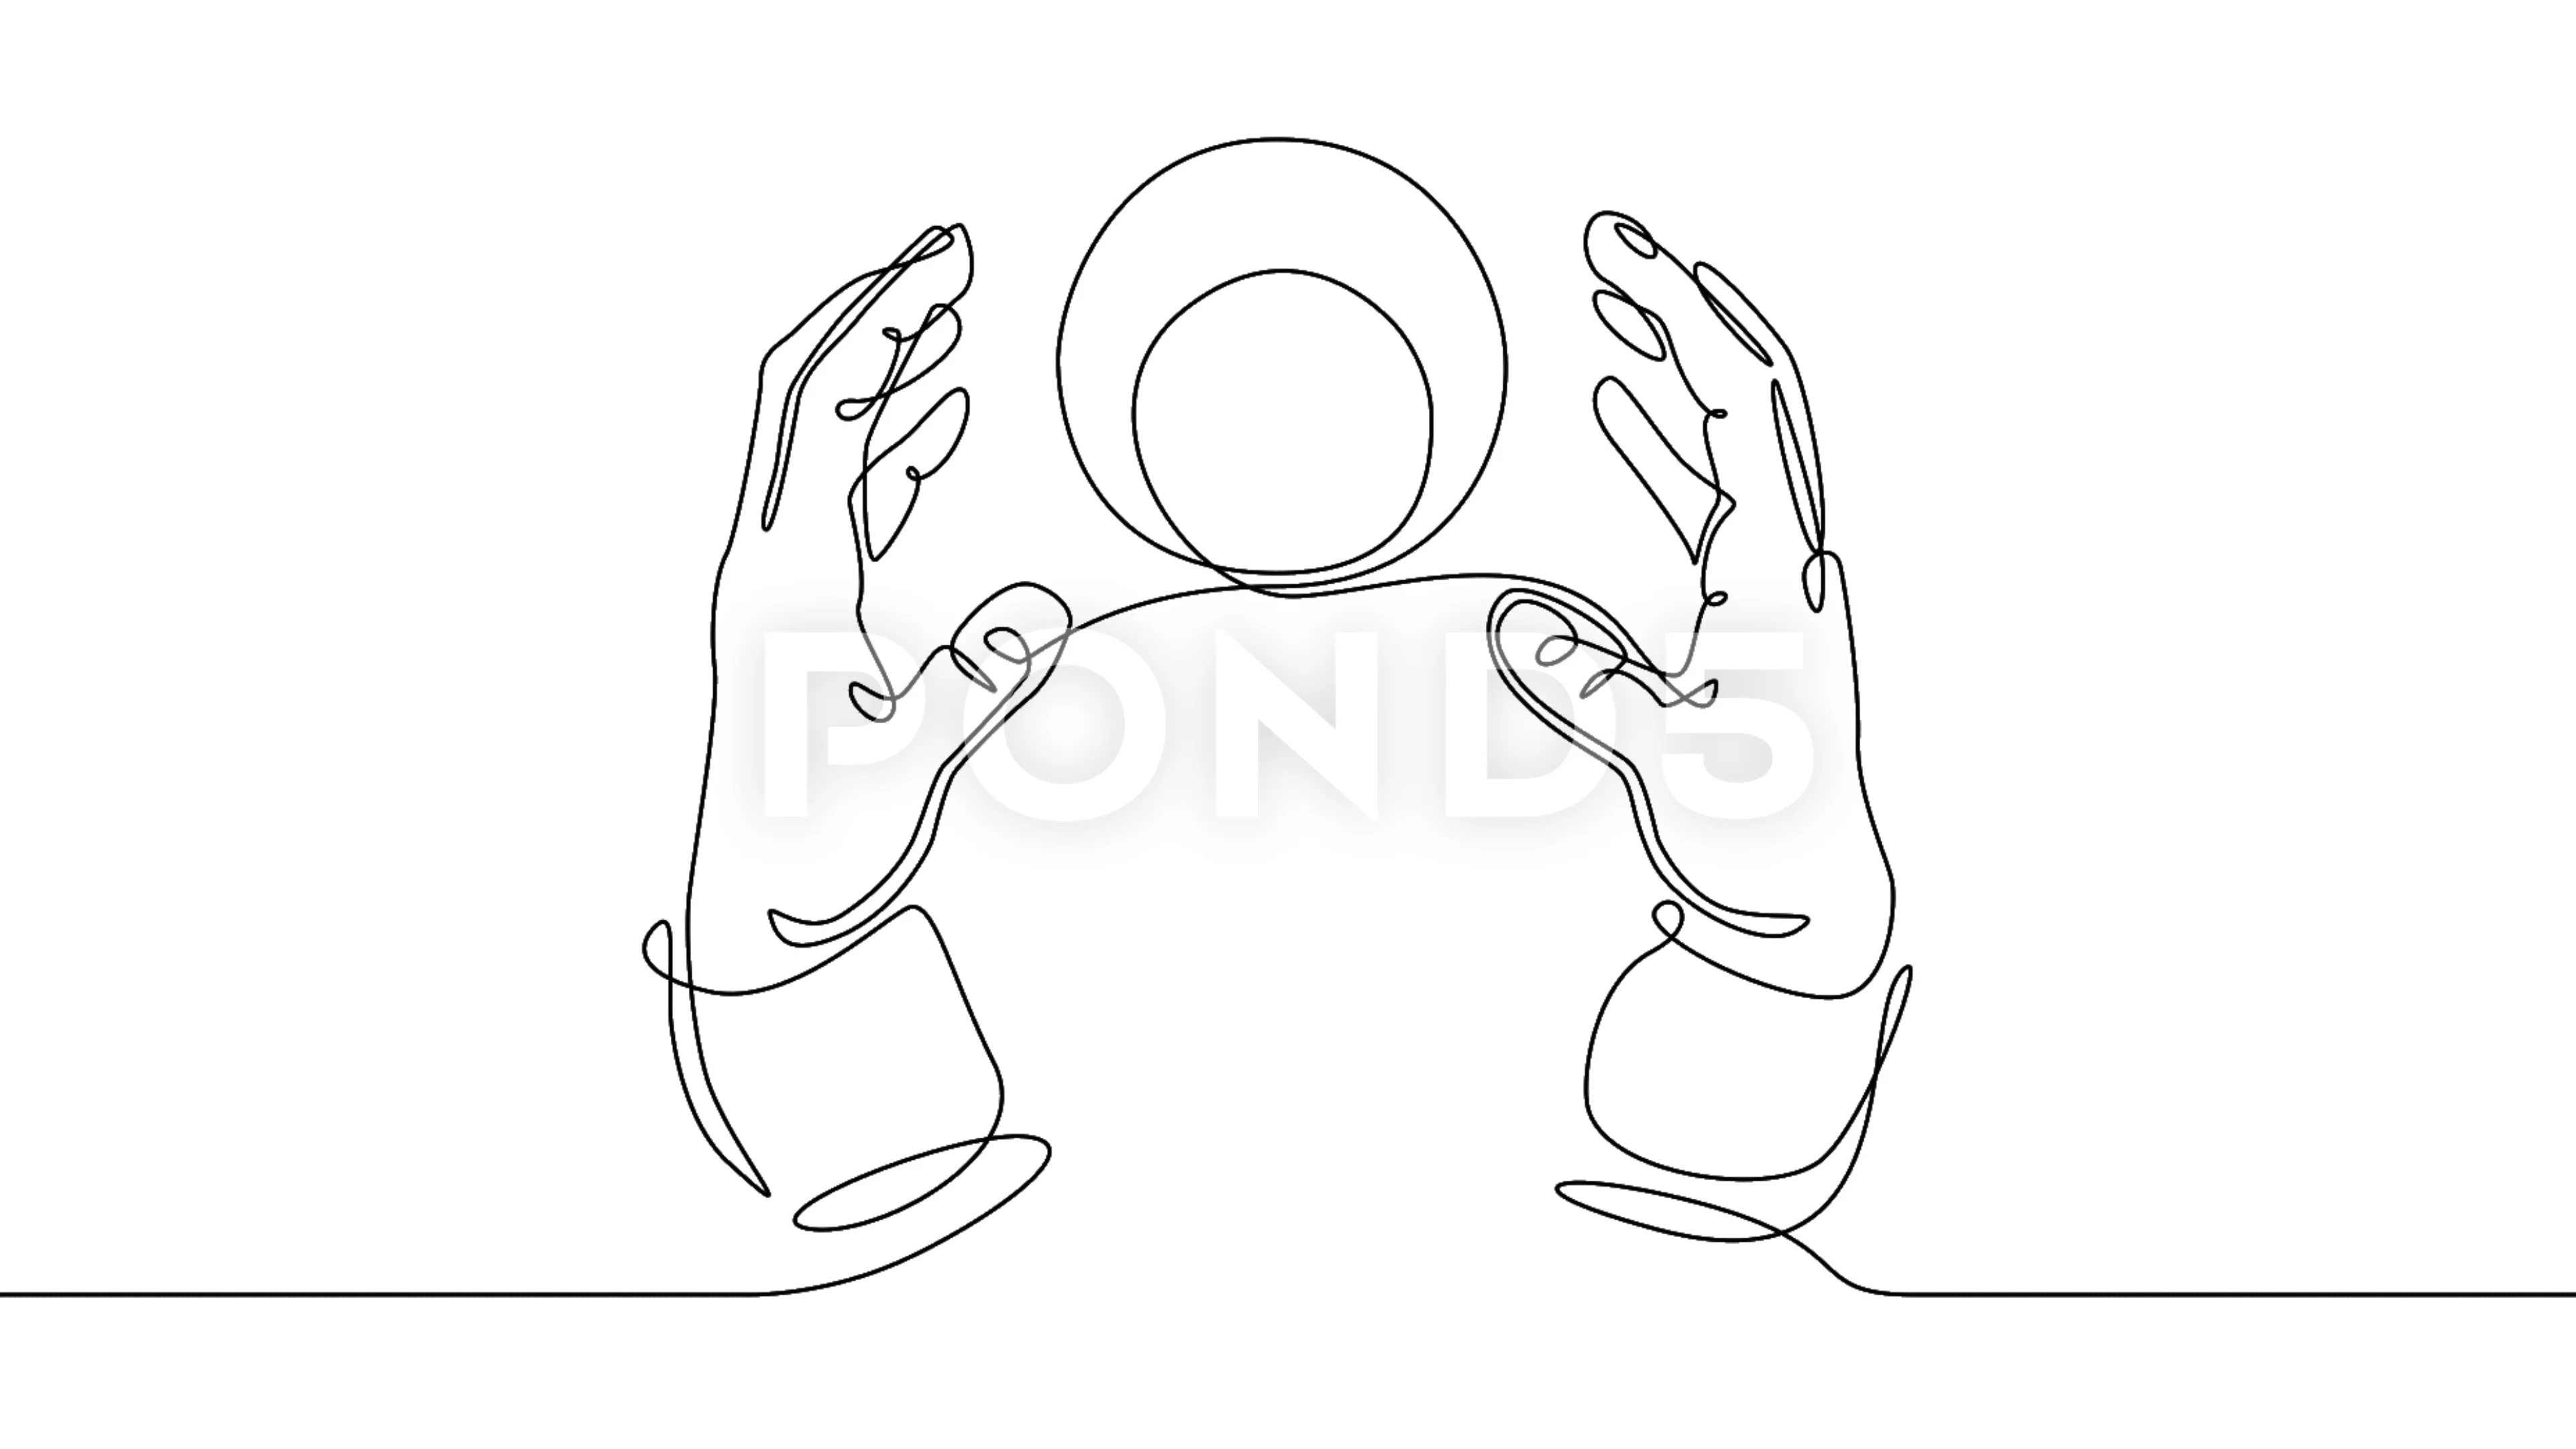 crystal ball drawing with hands